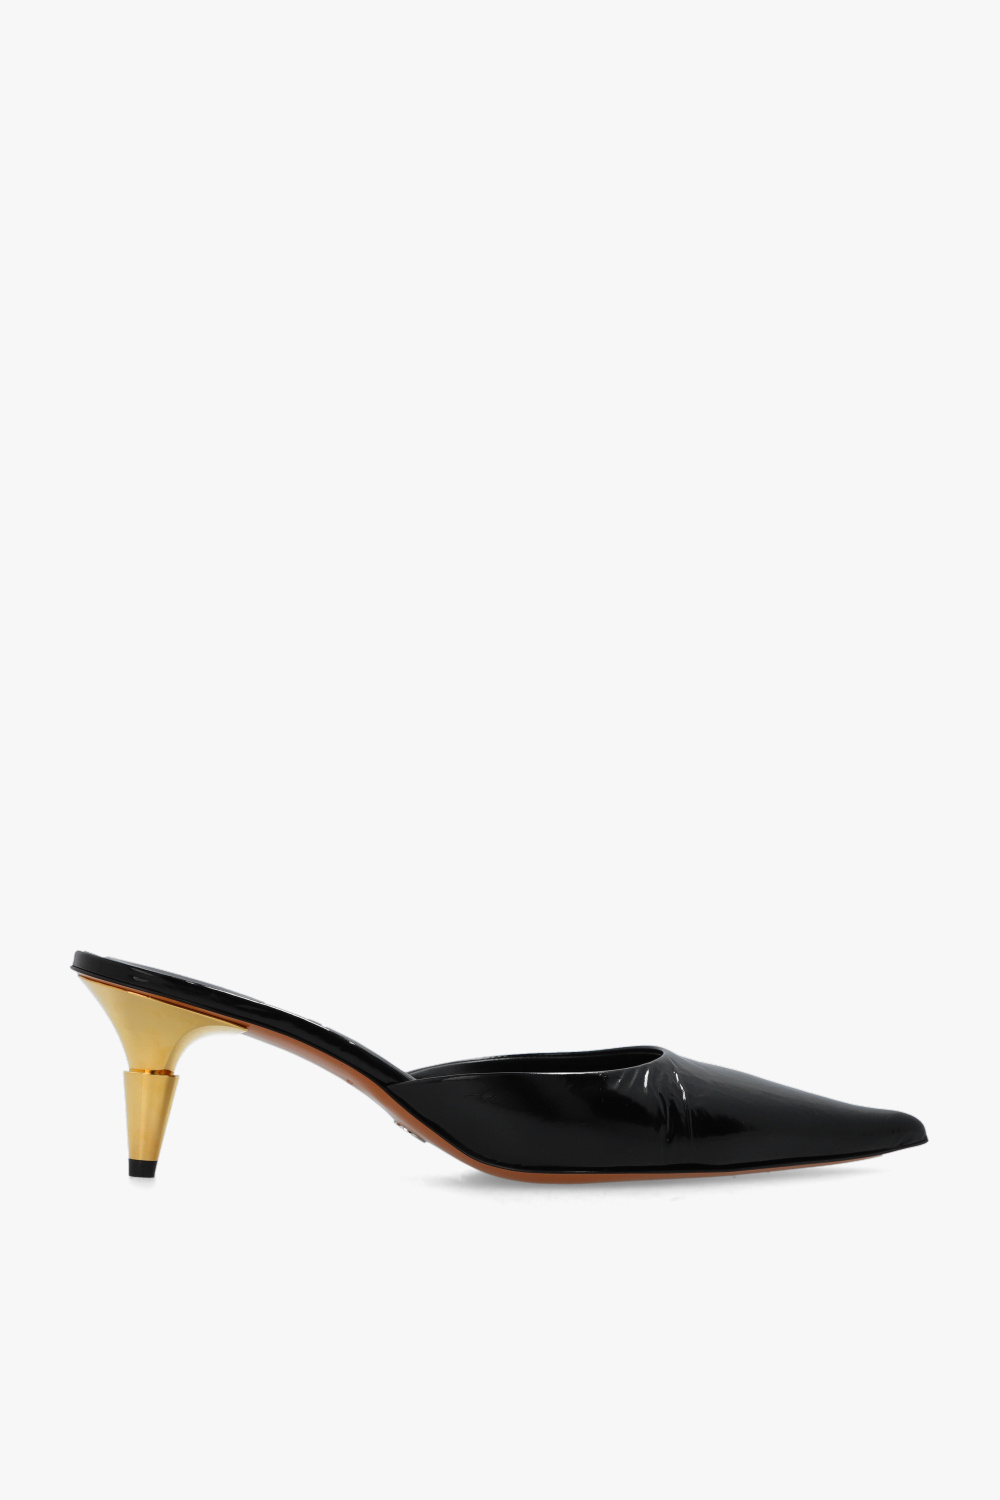 Proenza Schouler ‘Spike’ heeled mules in leather